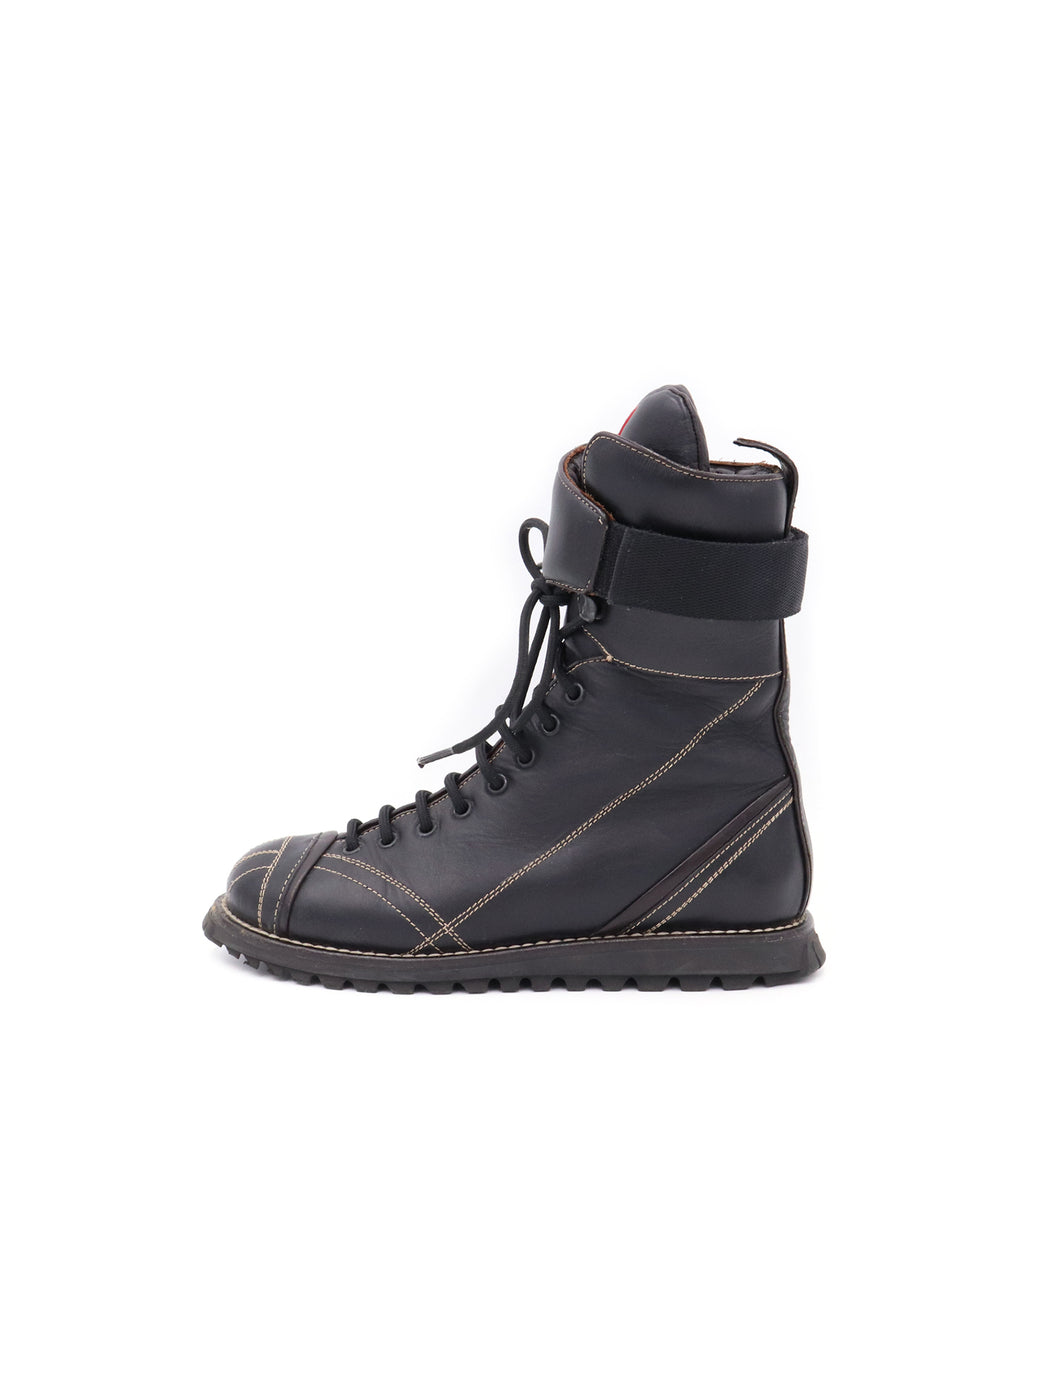 Prada Sport Leather Lace Up Boots